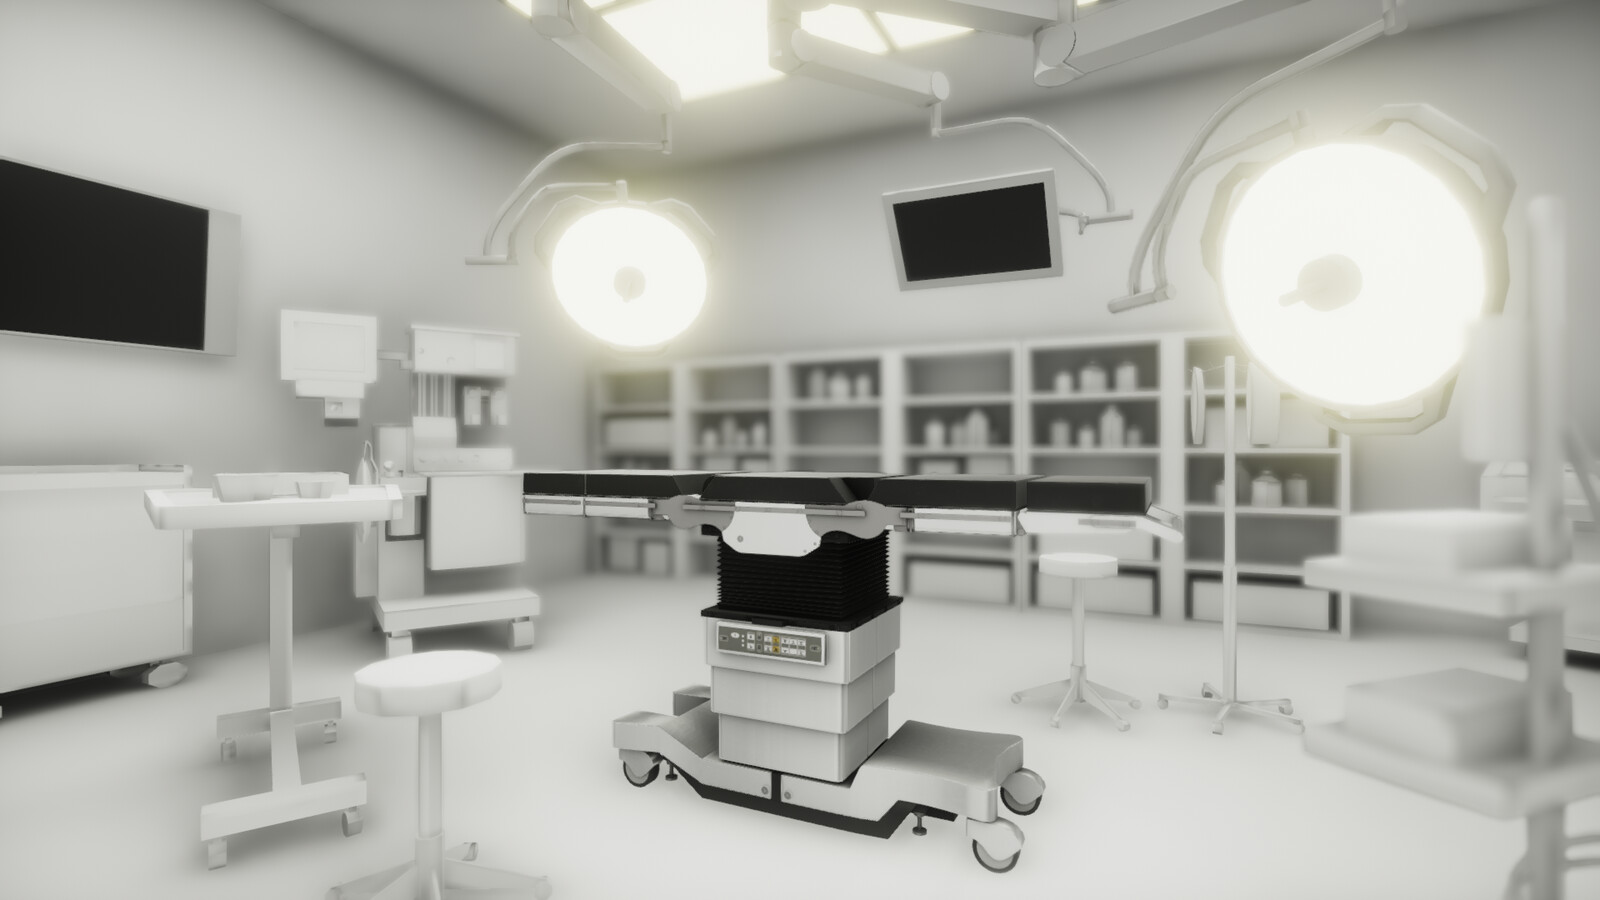 Operating Table inside the Unity game engine in an operating room block out. The table has been animated with blend shapes to lower and change angles.